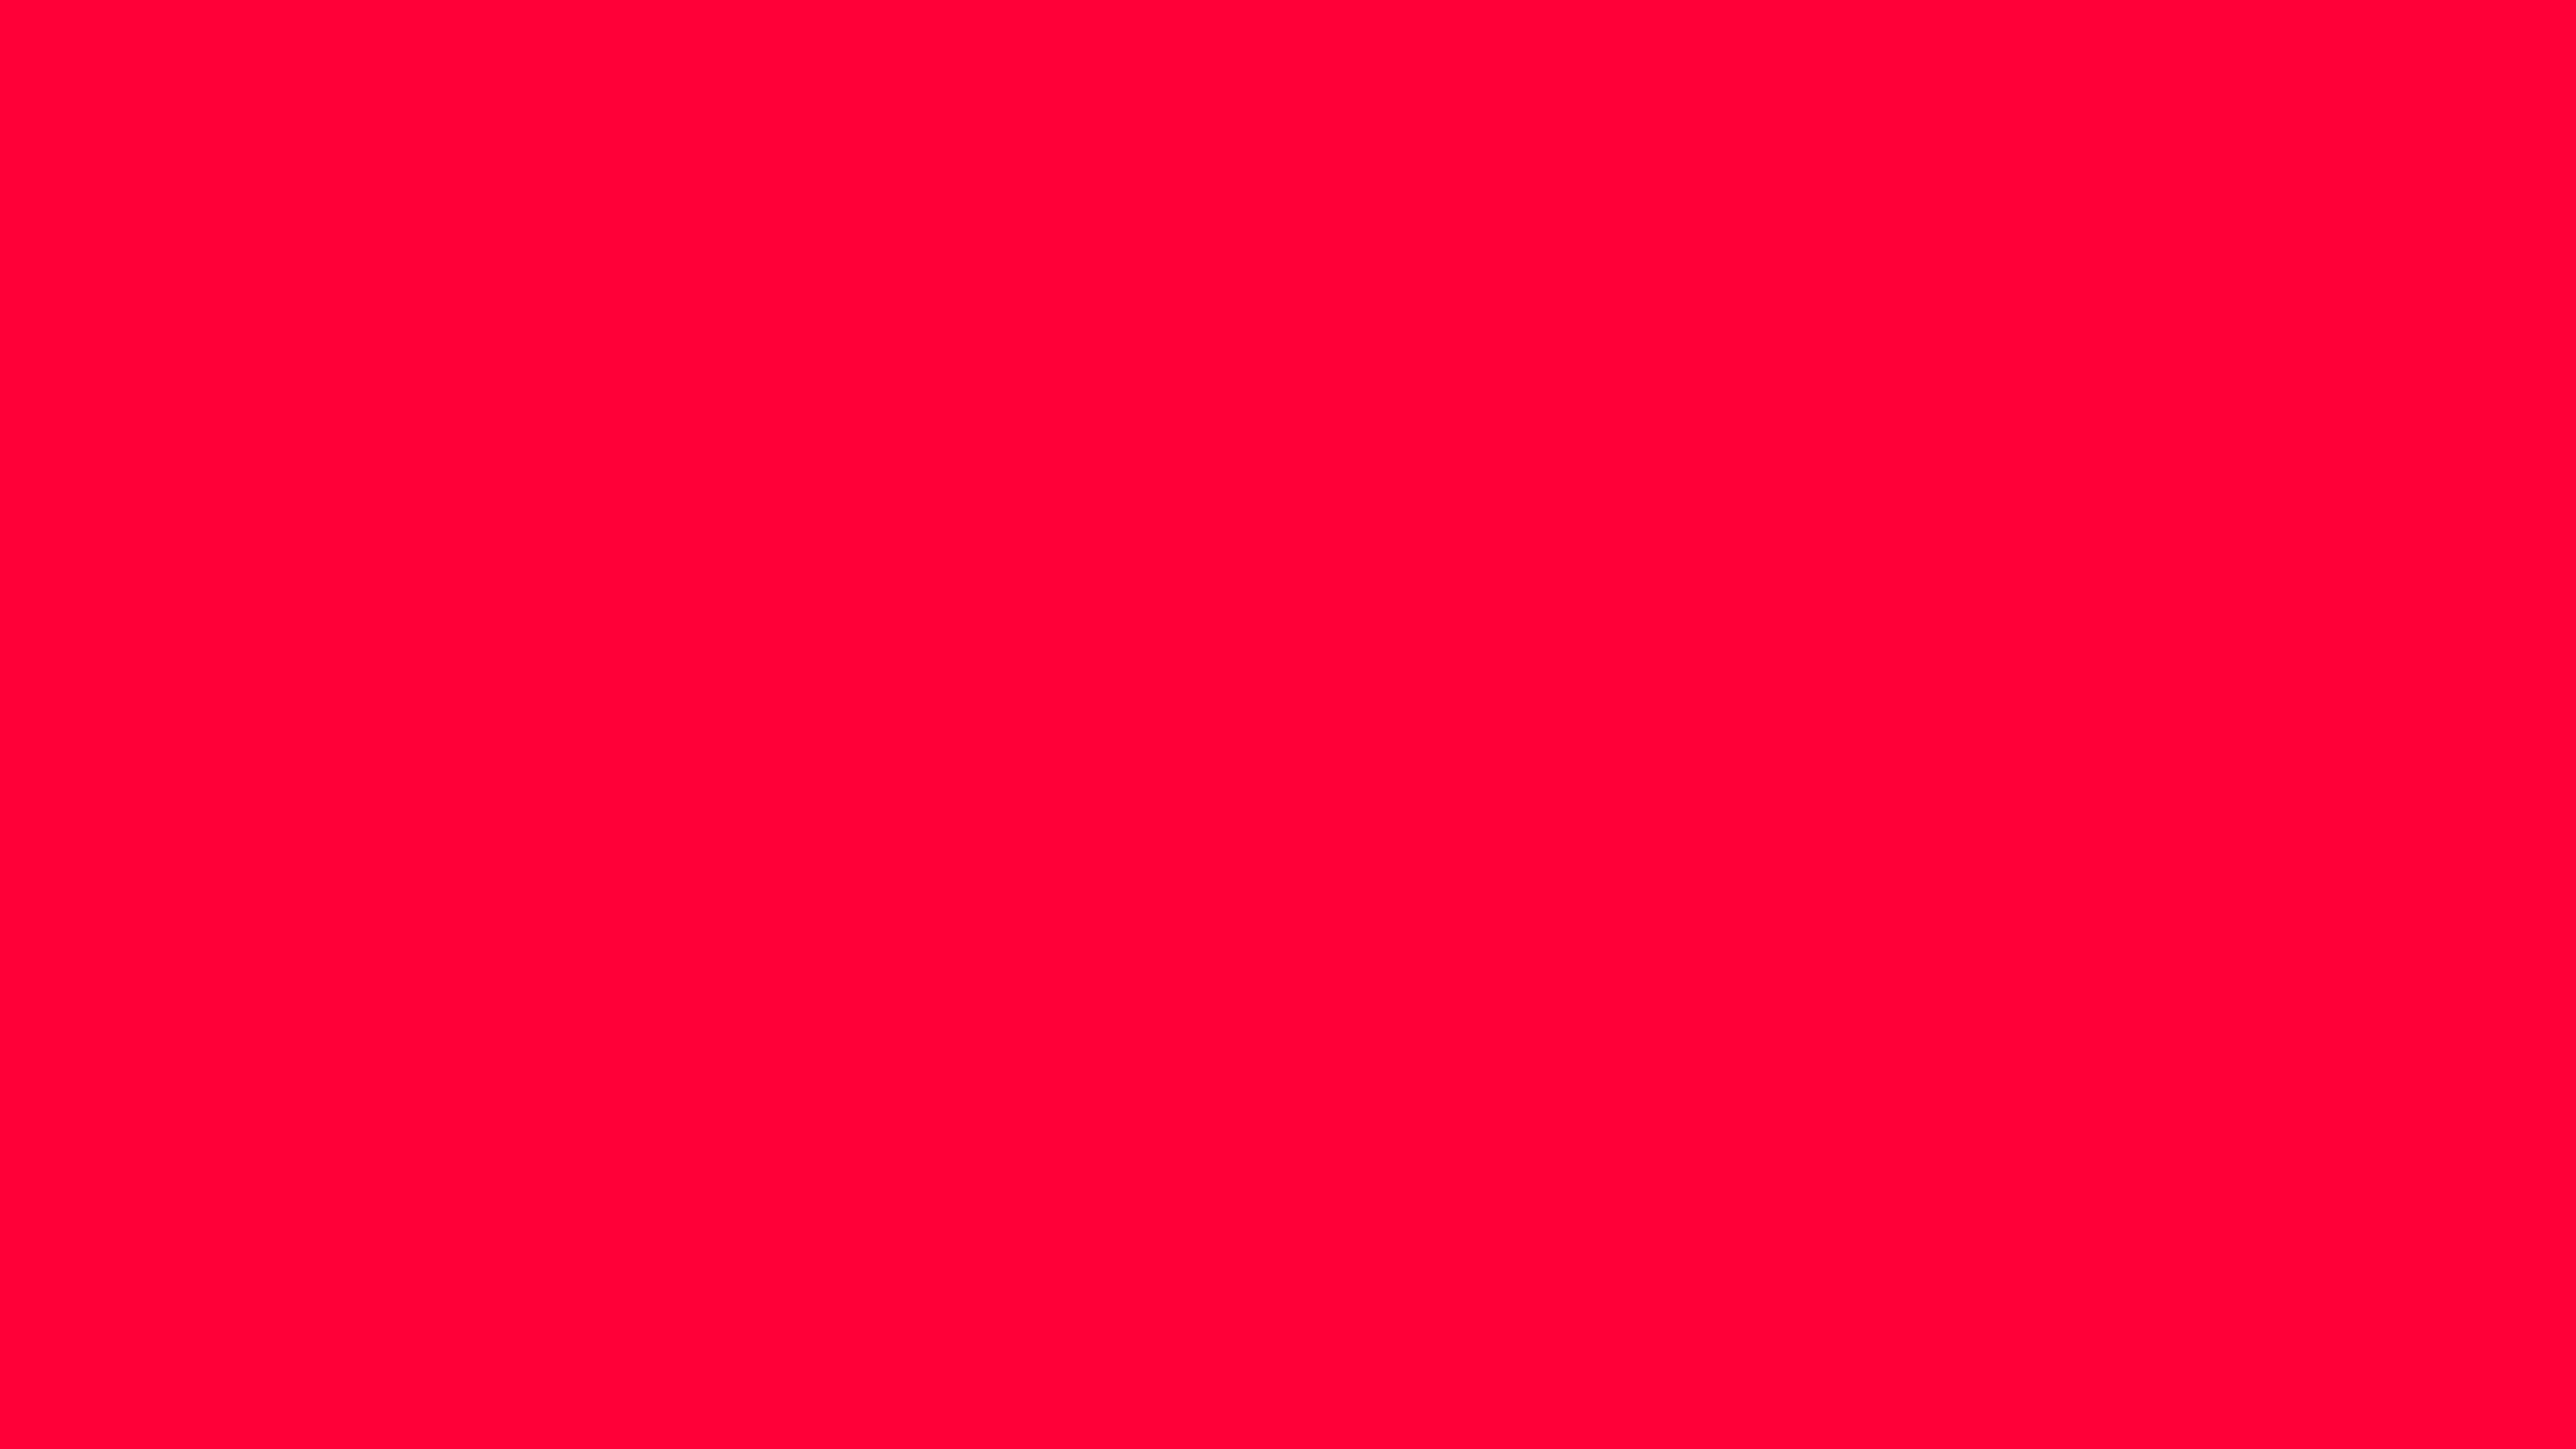 3840x2160 Carmine Red Solid Color Background